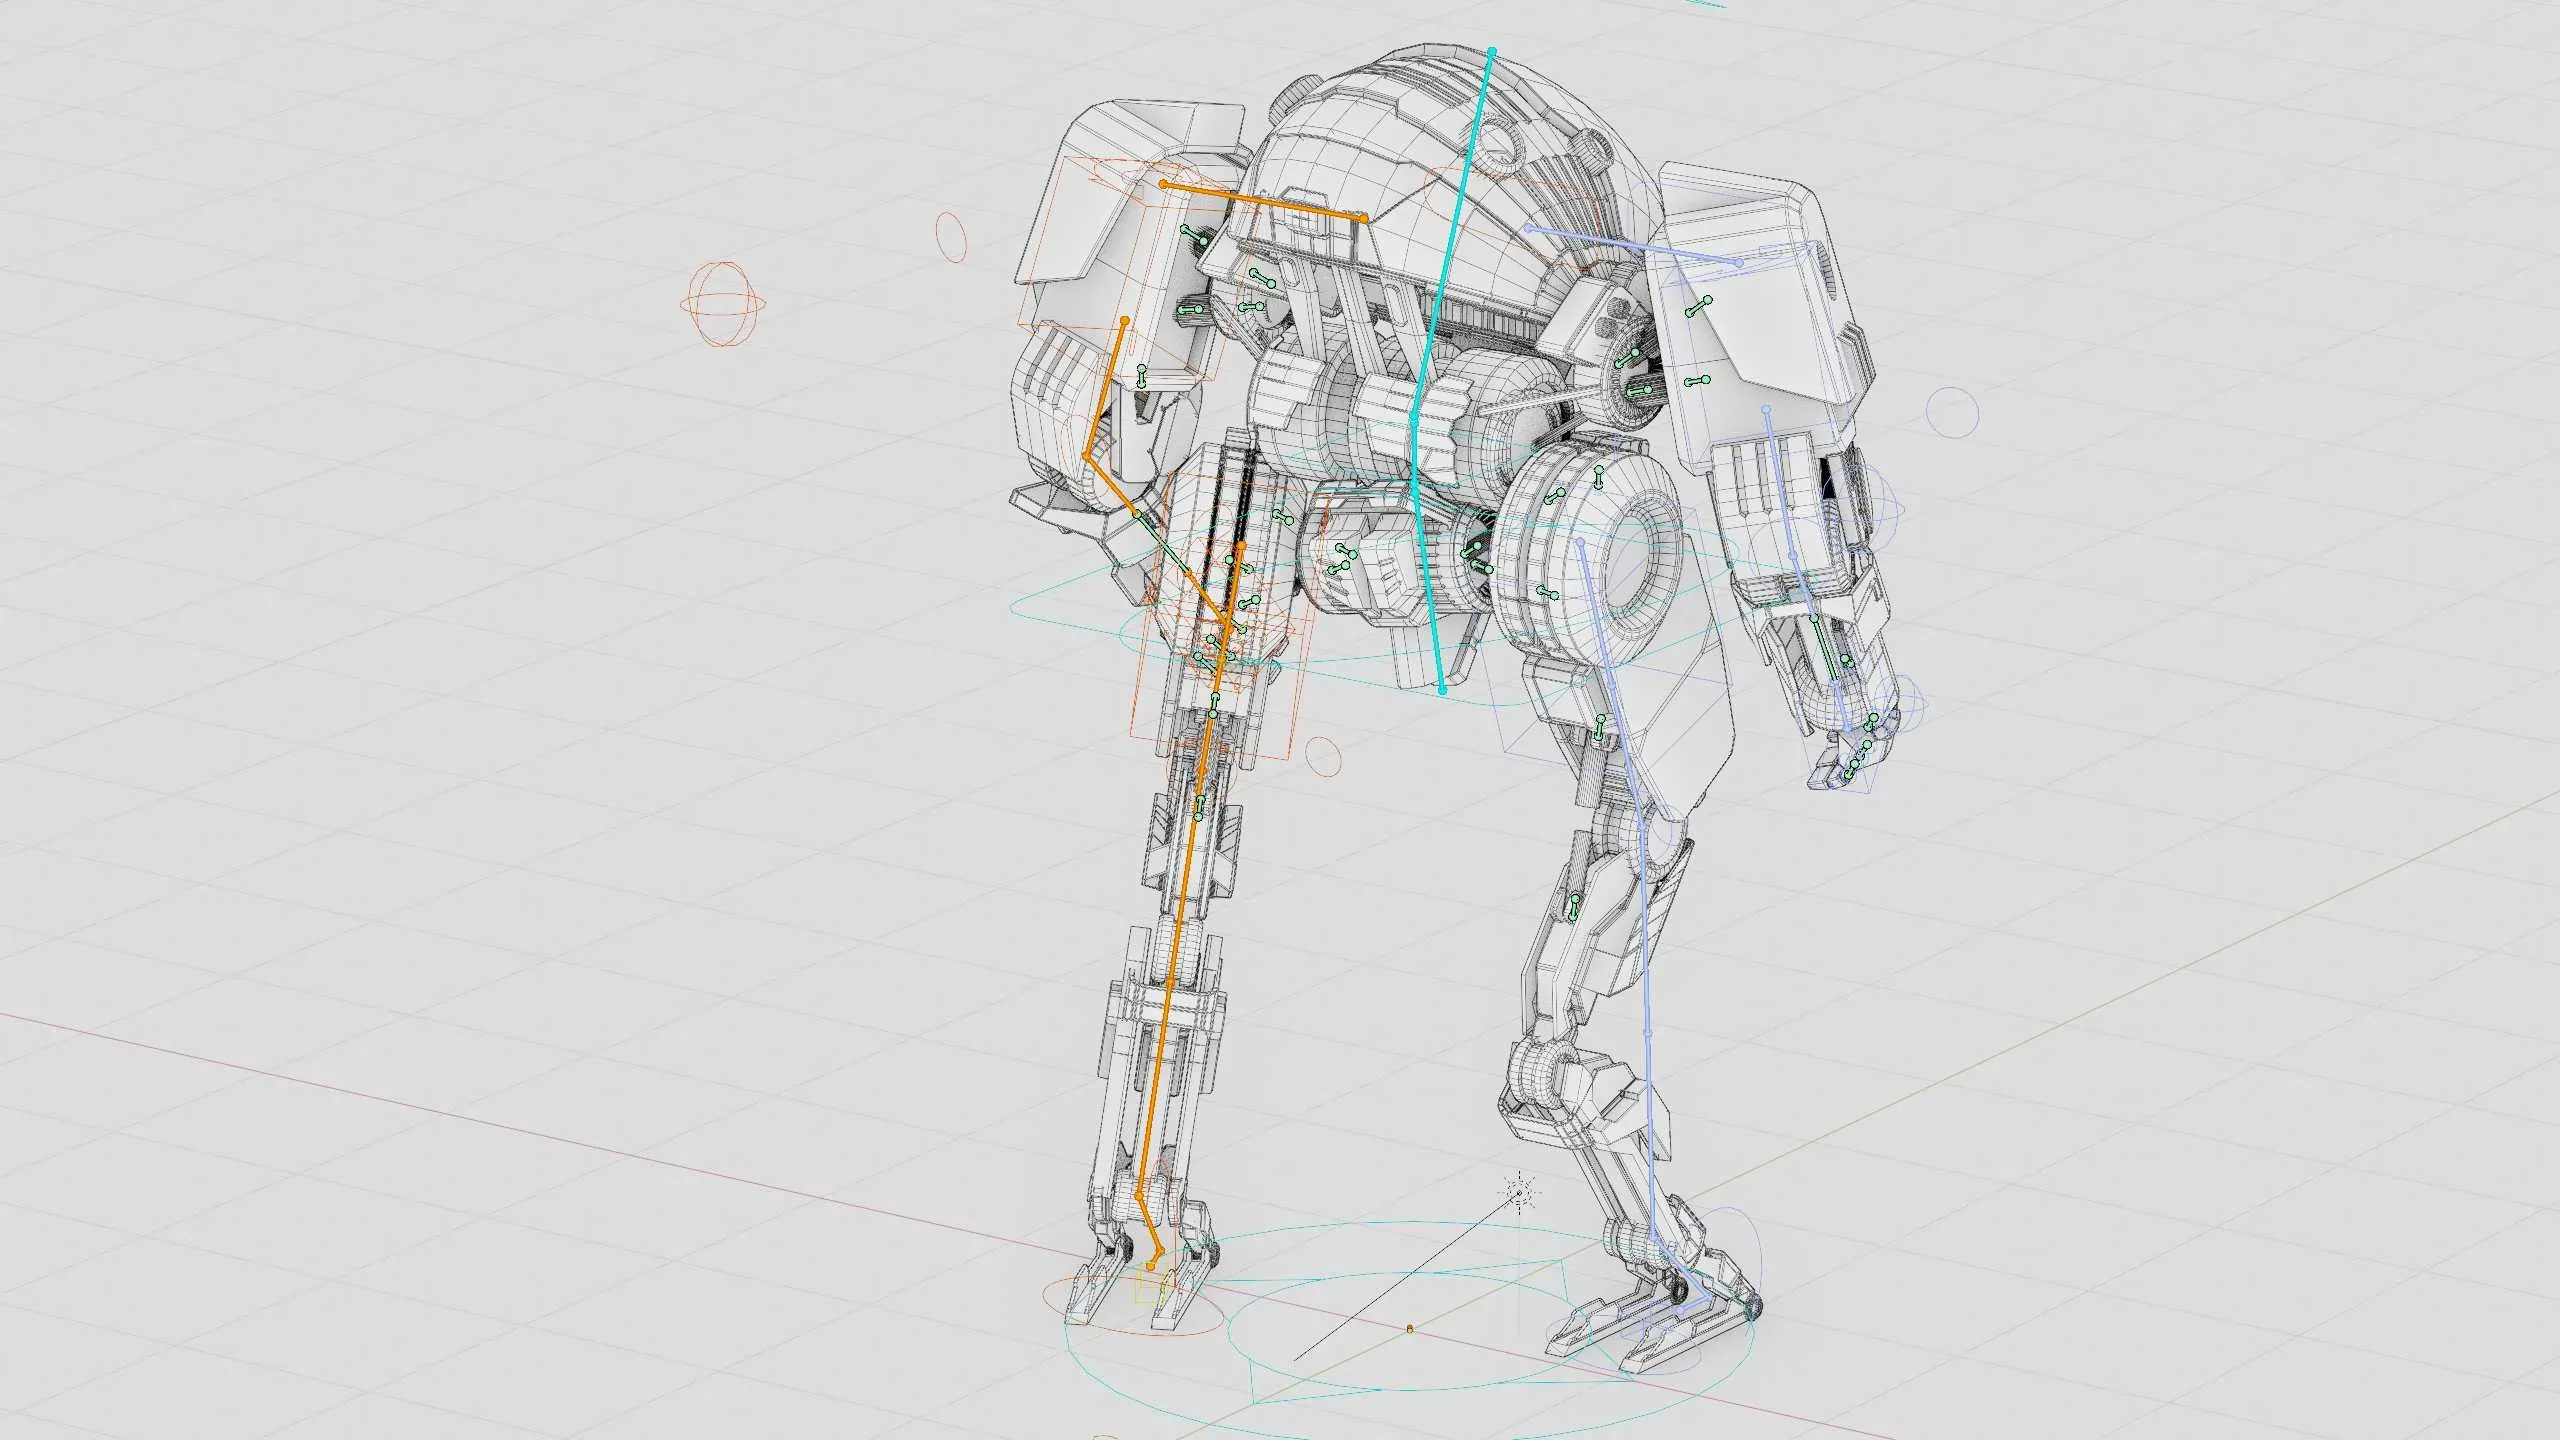 COMBAT DROID OMRON  Auto-Rig Pro Rigged For Mixamo, Unreal Engine, Unity